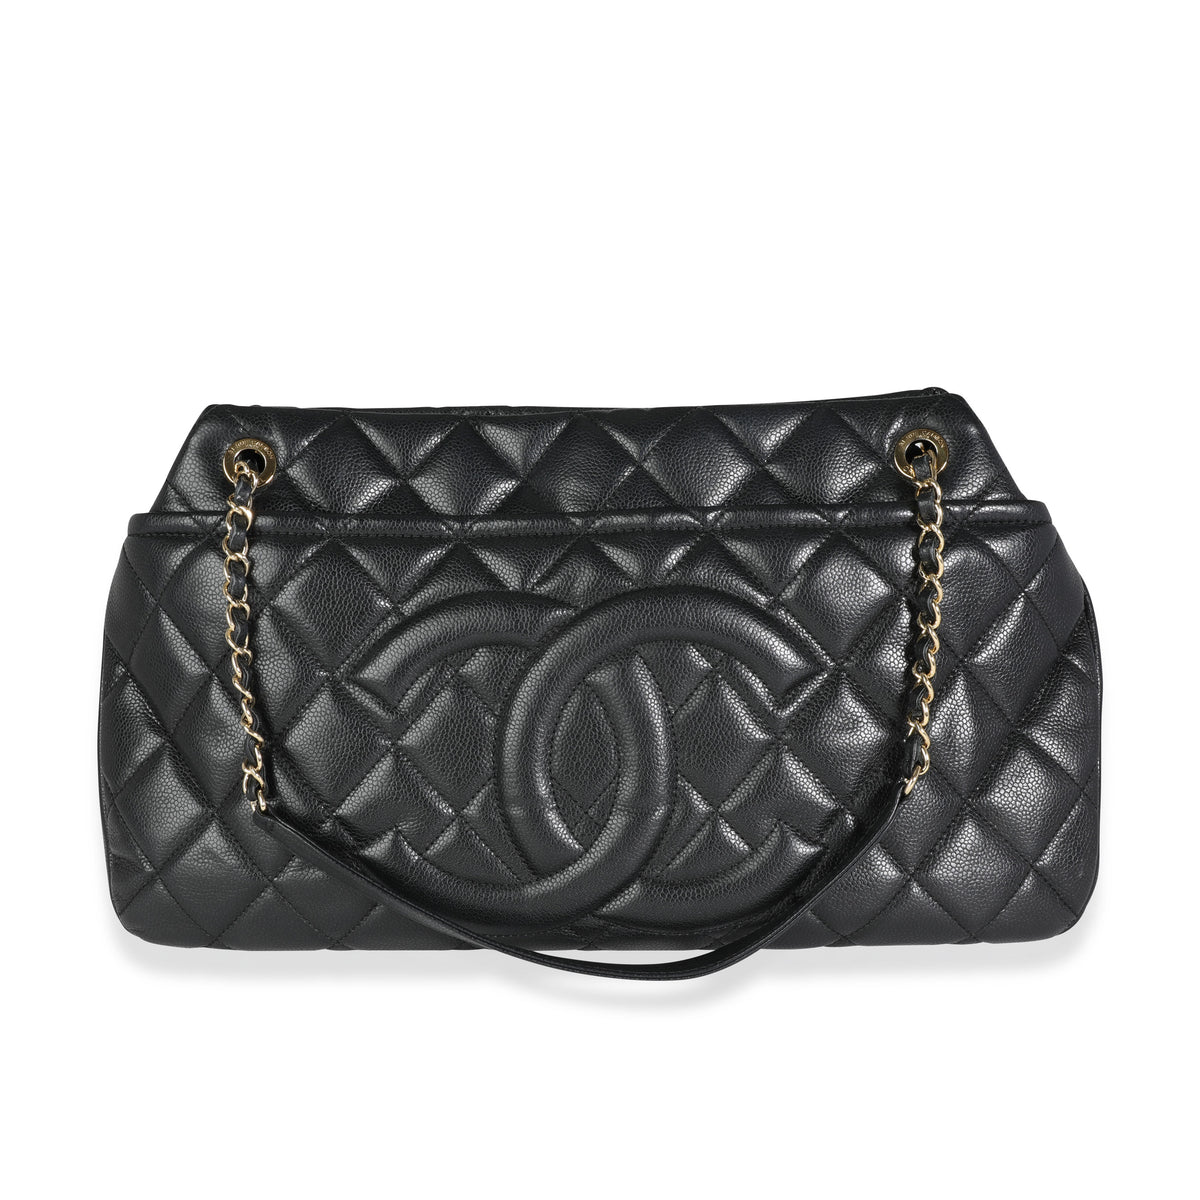 Chanel Black Quilted Caviar Timeless Soft Shopping Tote